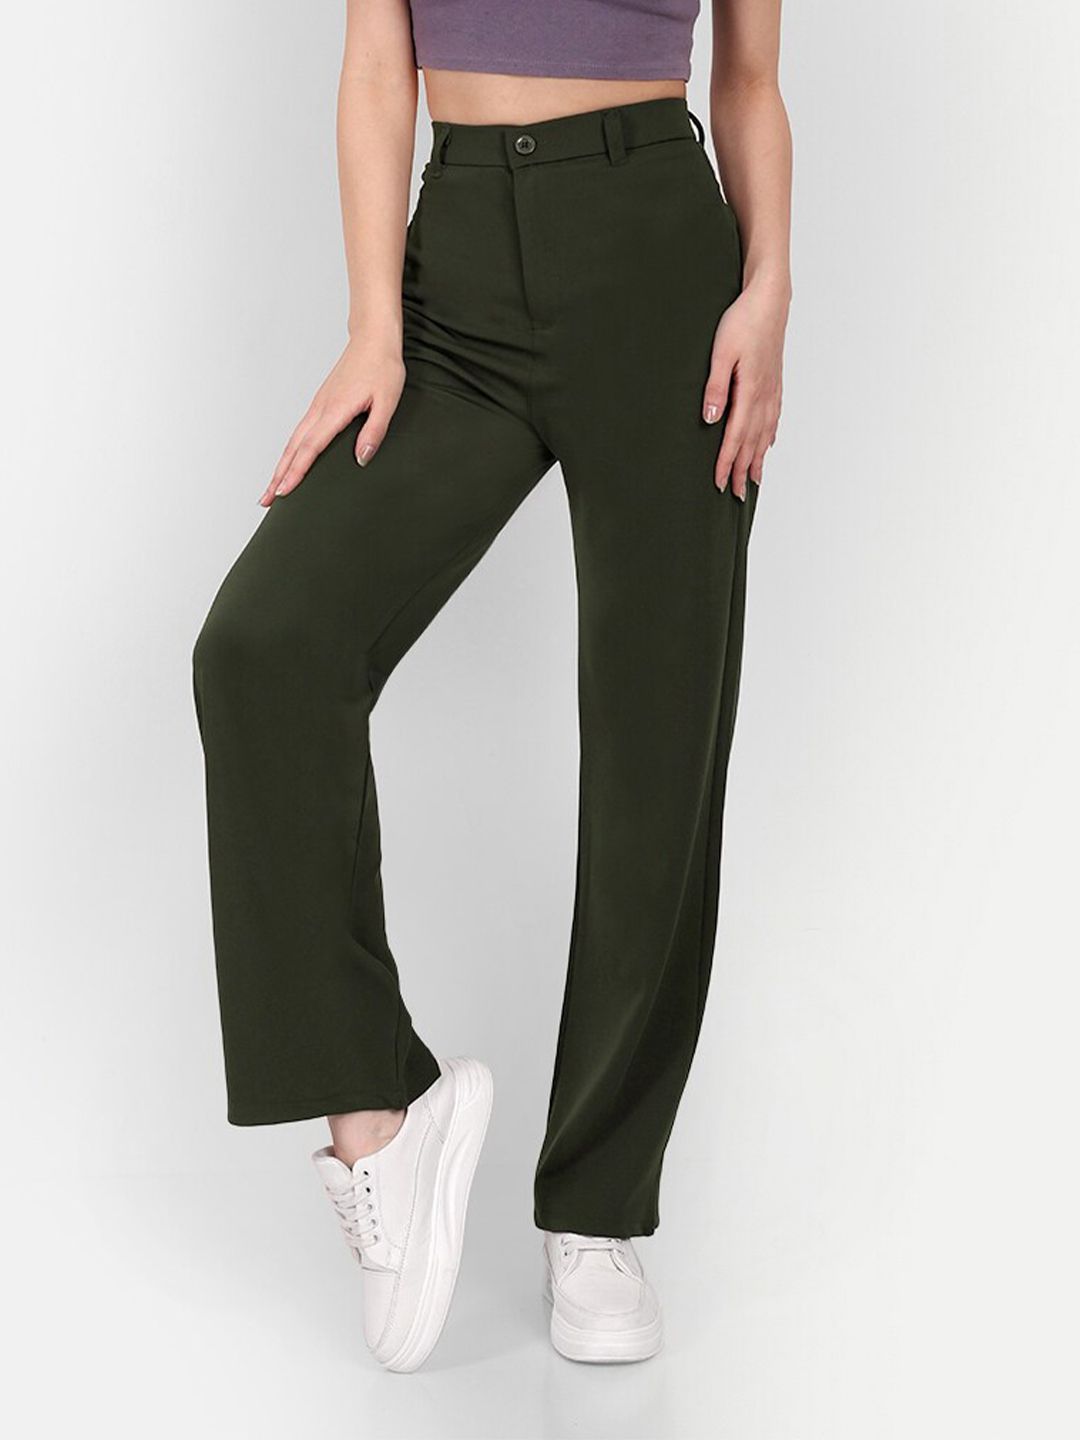 Next One Women Smart Loose Fit High-Rise Trousers Price in India